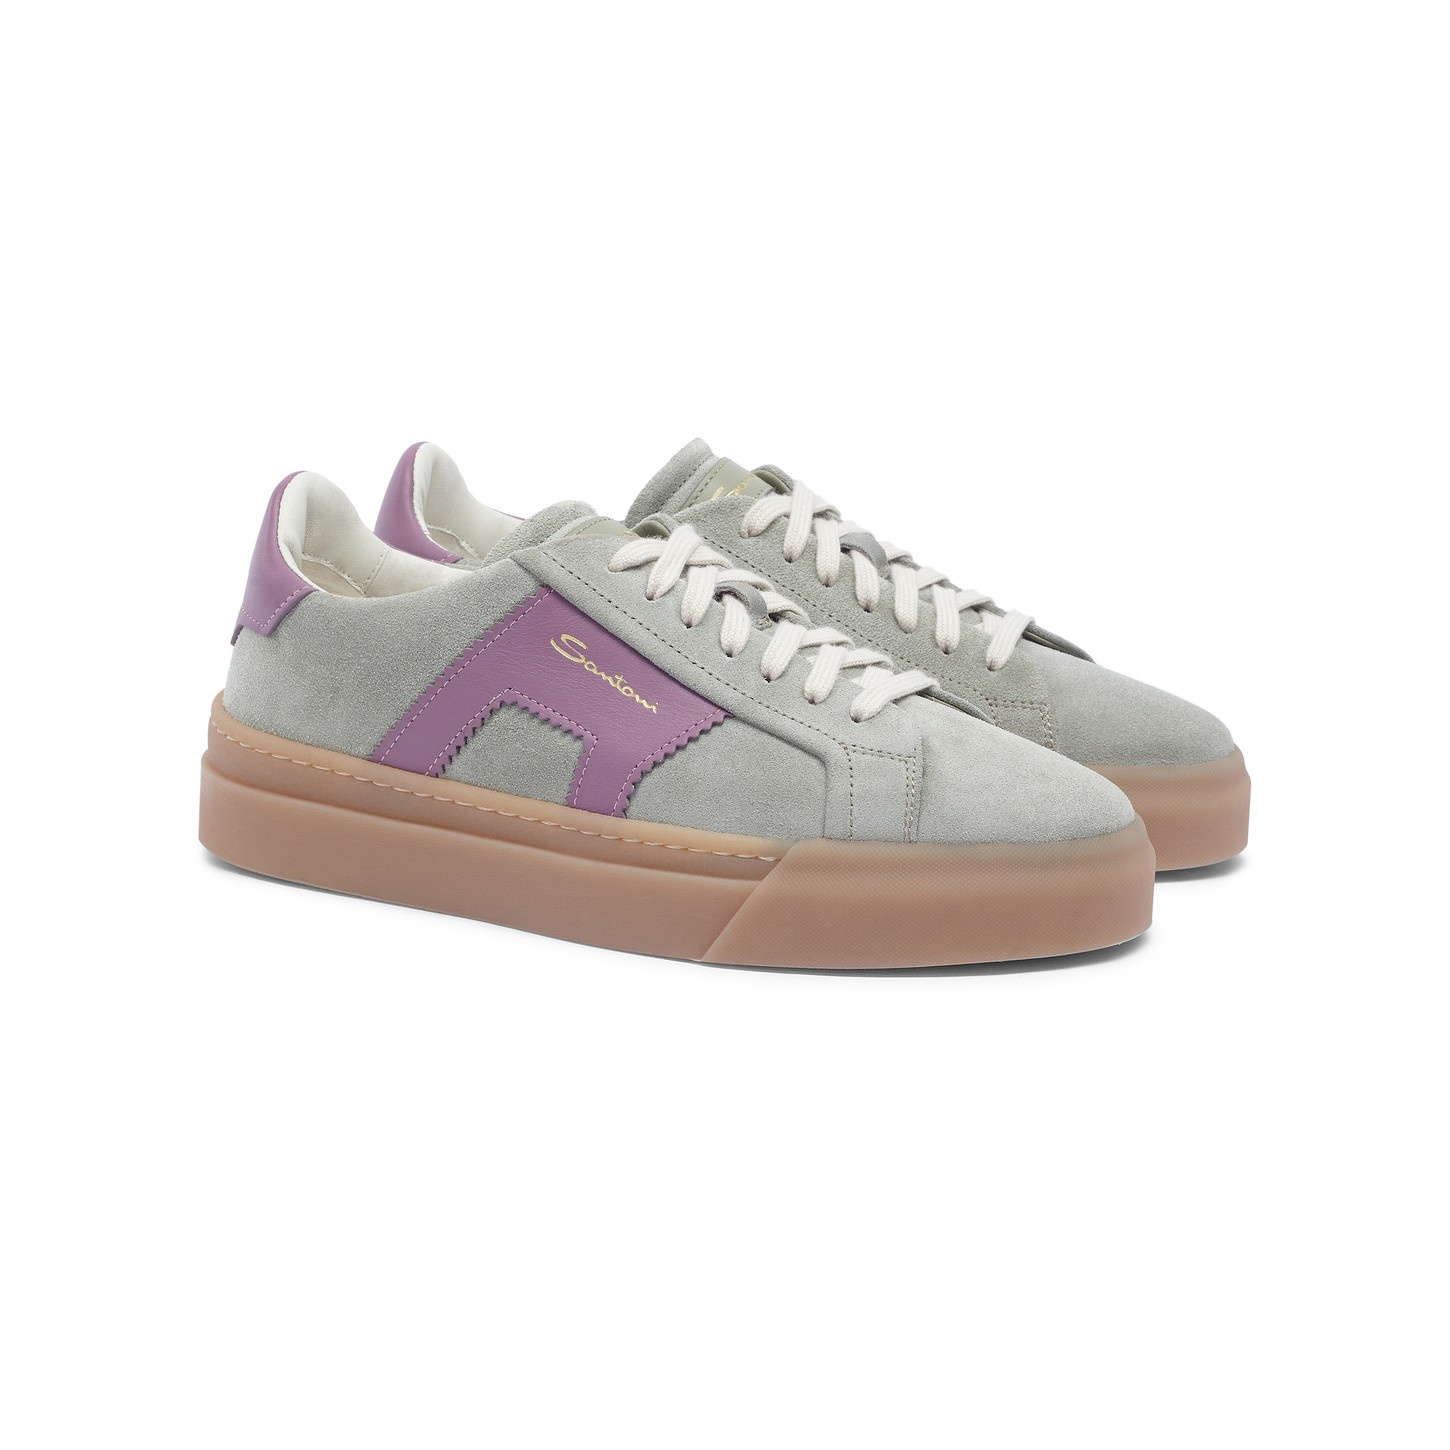 Women's green and purple suede and leather double buckle sneaker - 3